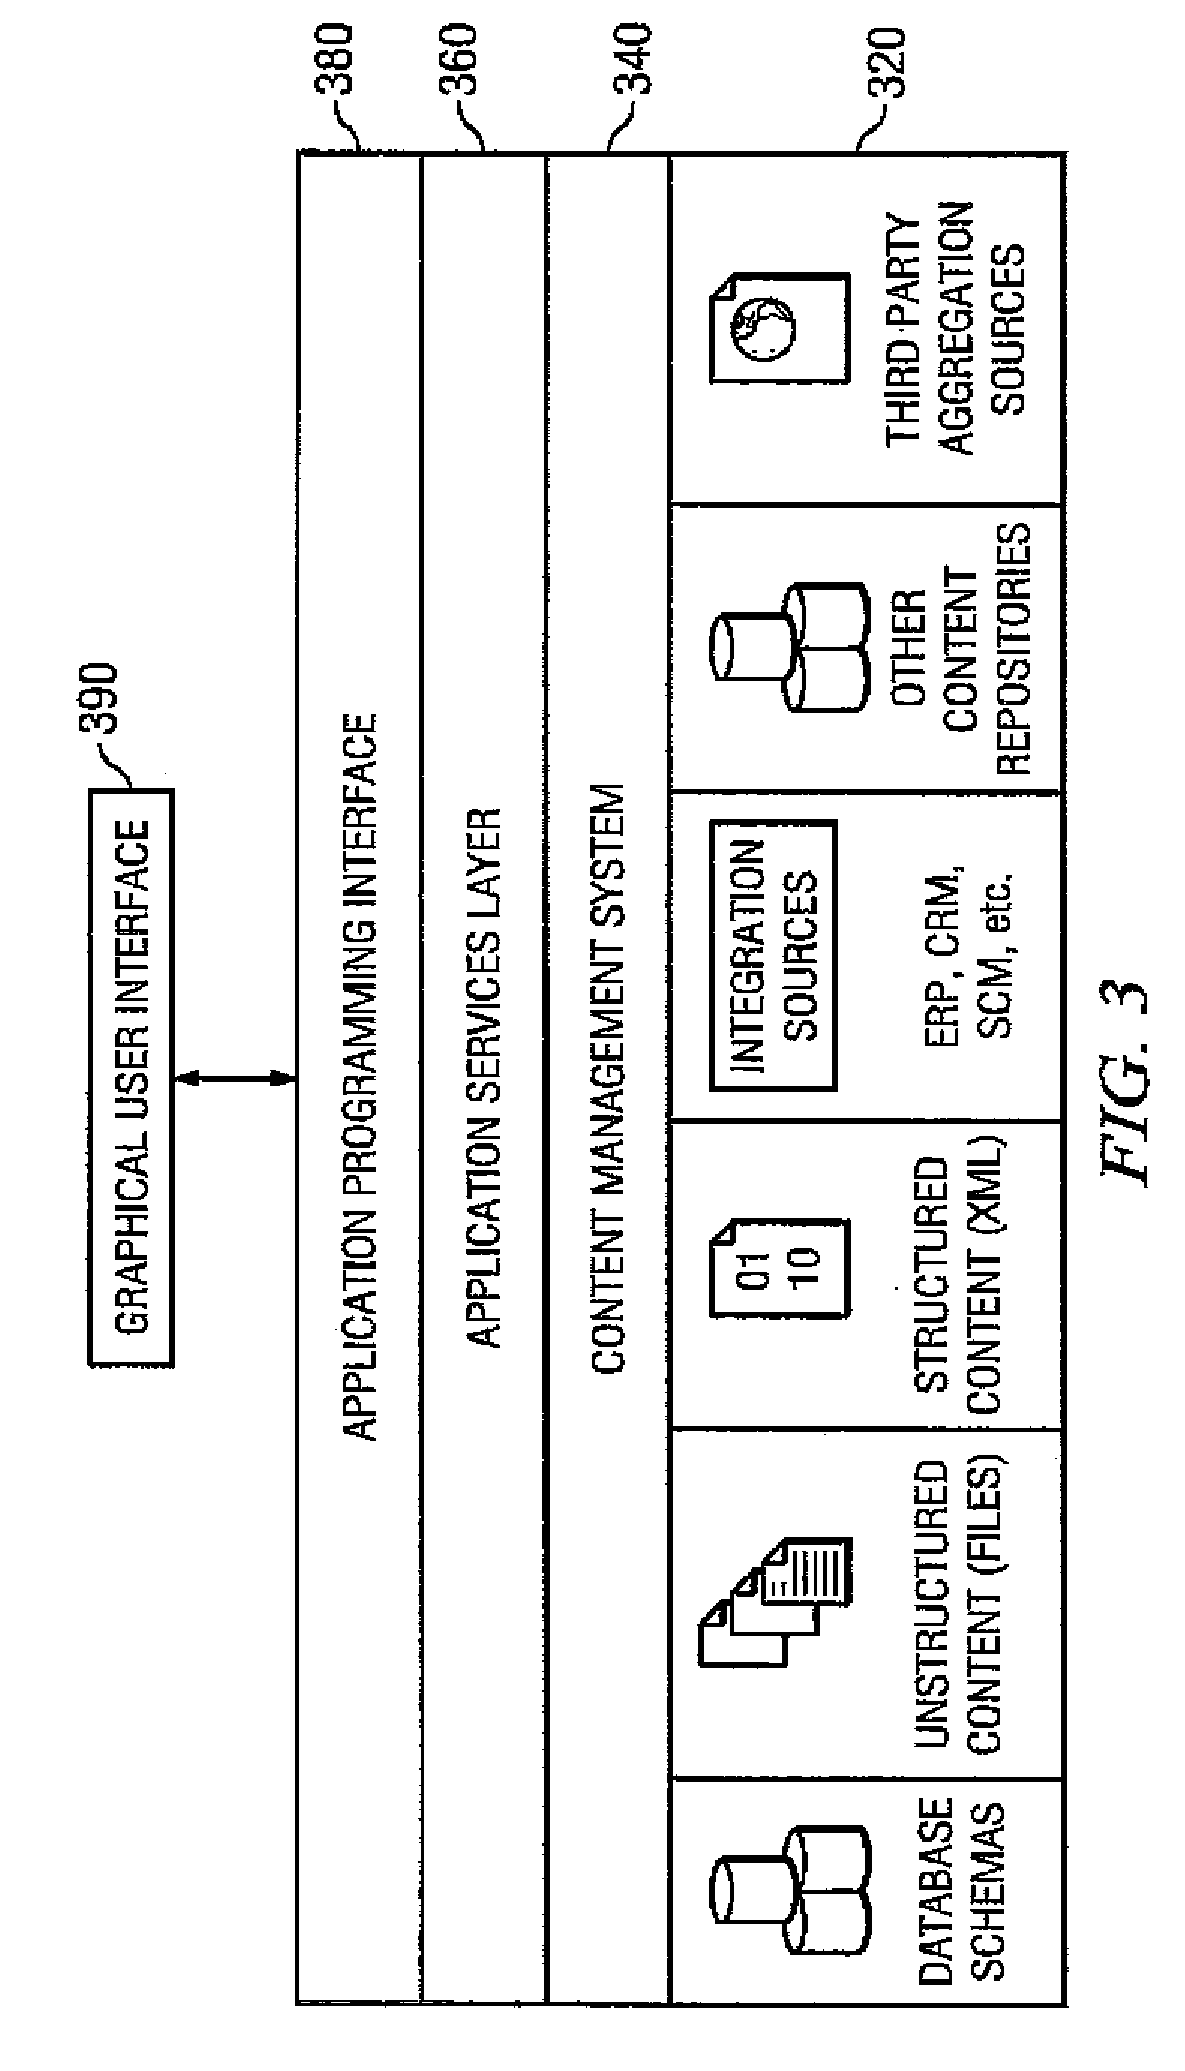 Method and System for Modeling of System Content for Businesses